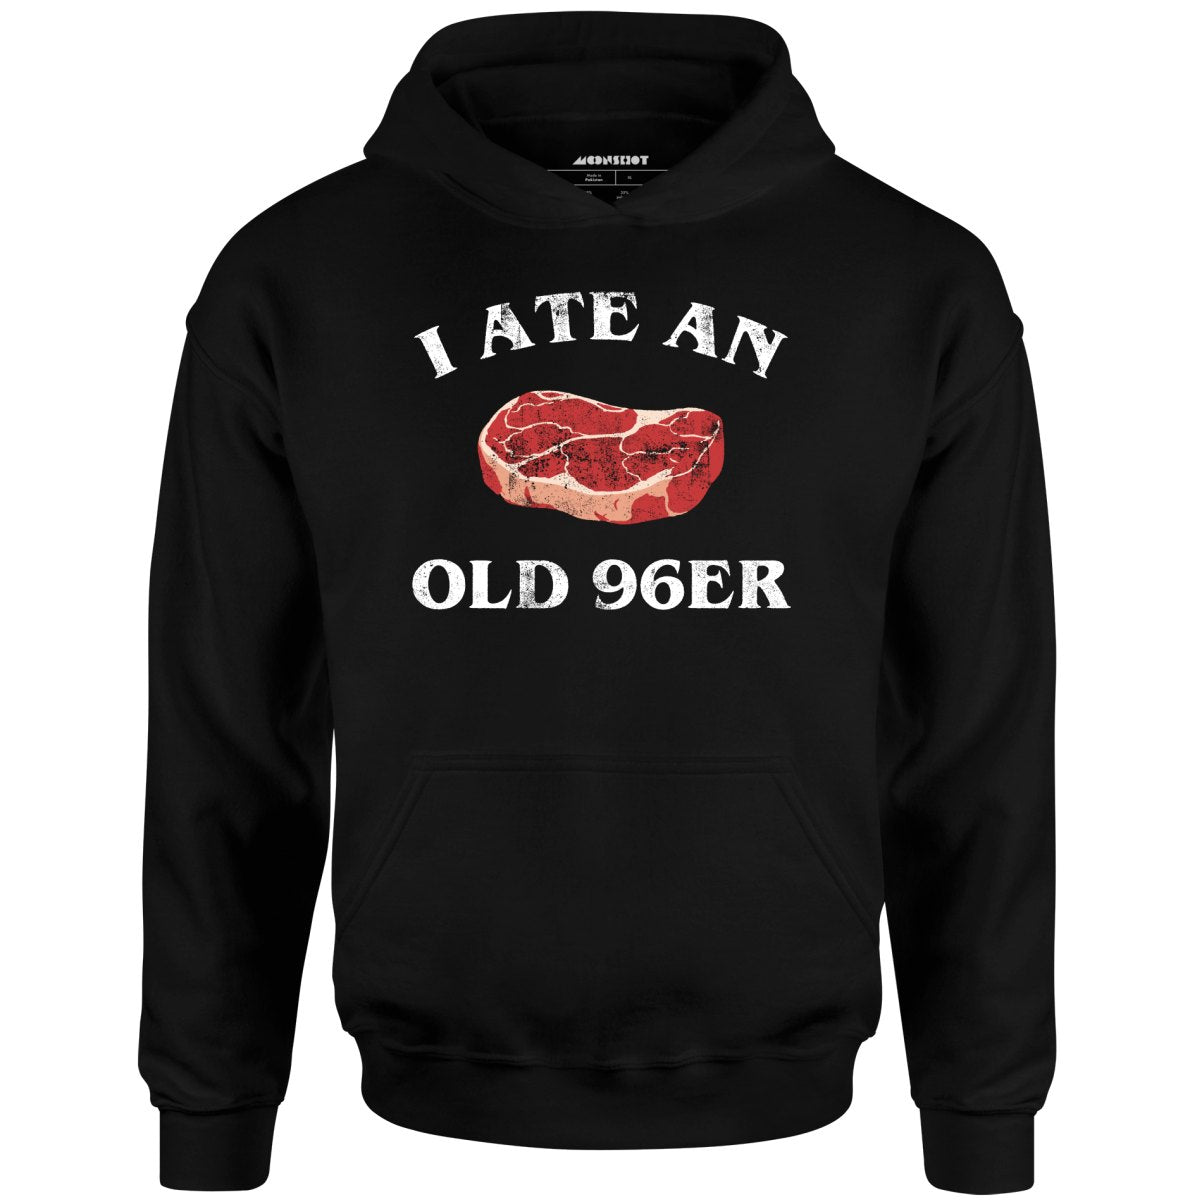 I Ate An Old 96er - Unisex Hoodie